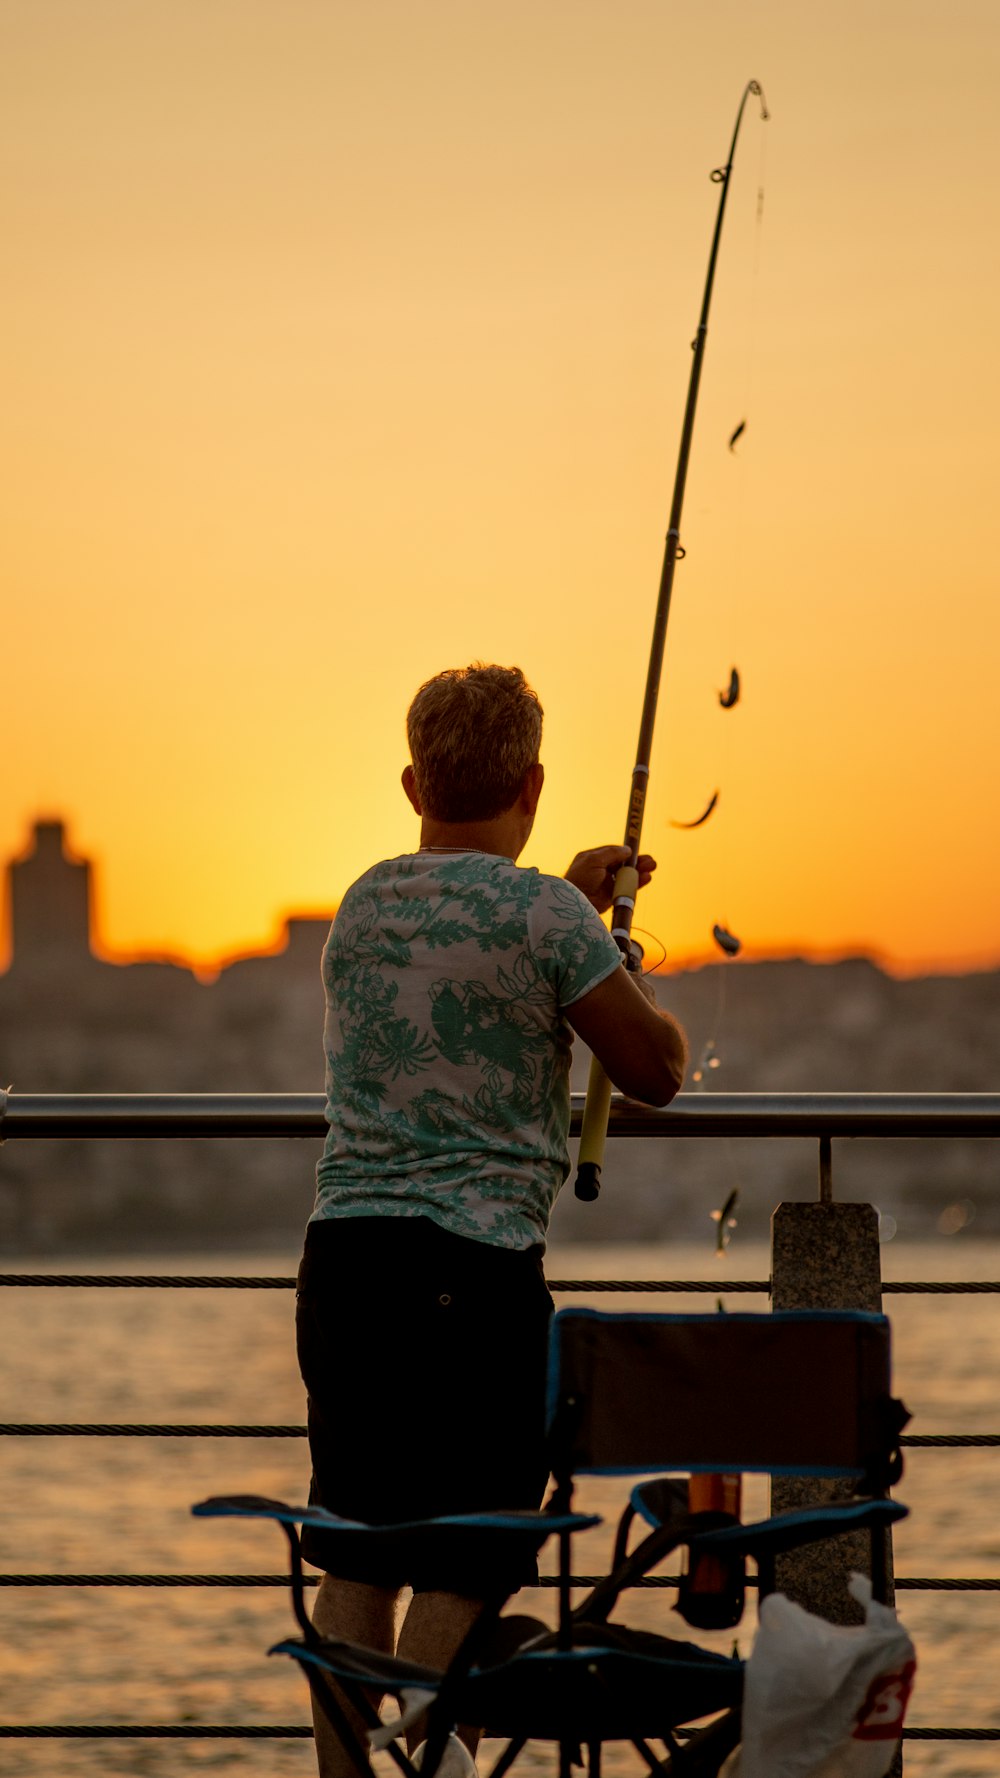 a man fishing on a boat at sunset